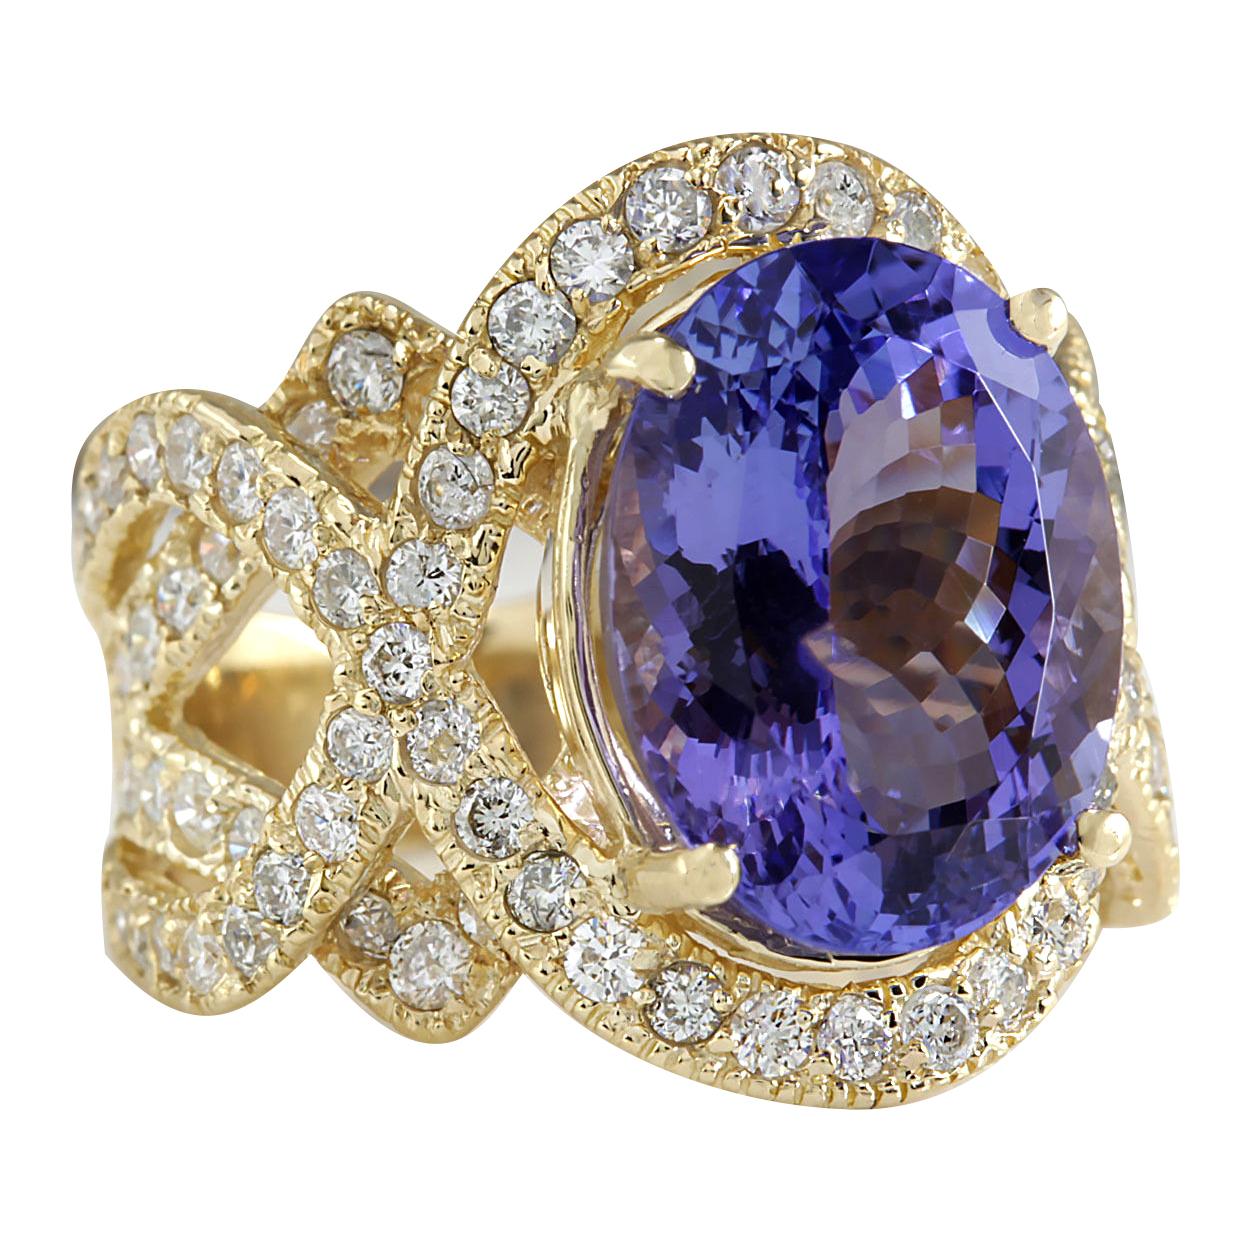 Indulge in unparalleled luxury with our stunning 10.62 Carat Tanzanite Diamond Ring, expertly crafted in 14 Karat Yellow Gold. Every detail exudes opulence, from the stamped 14K hallmark affirming its premium quality to the total ring weight of 12.2